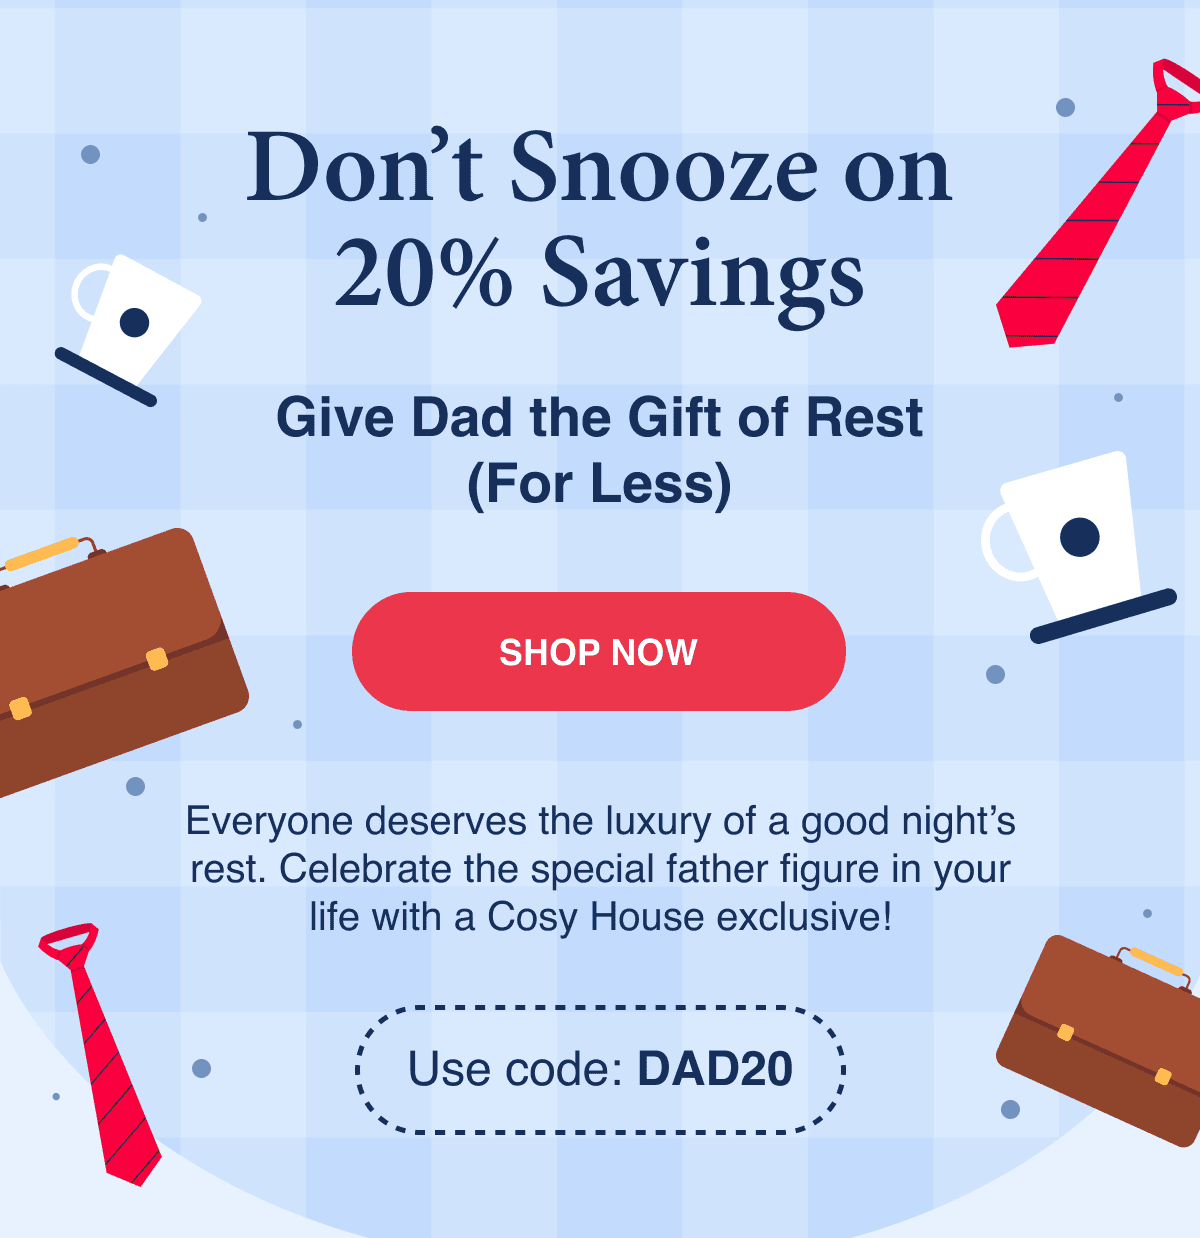 Don't Snooze On 20% Savings!